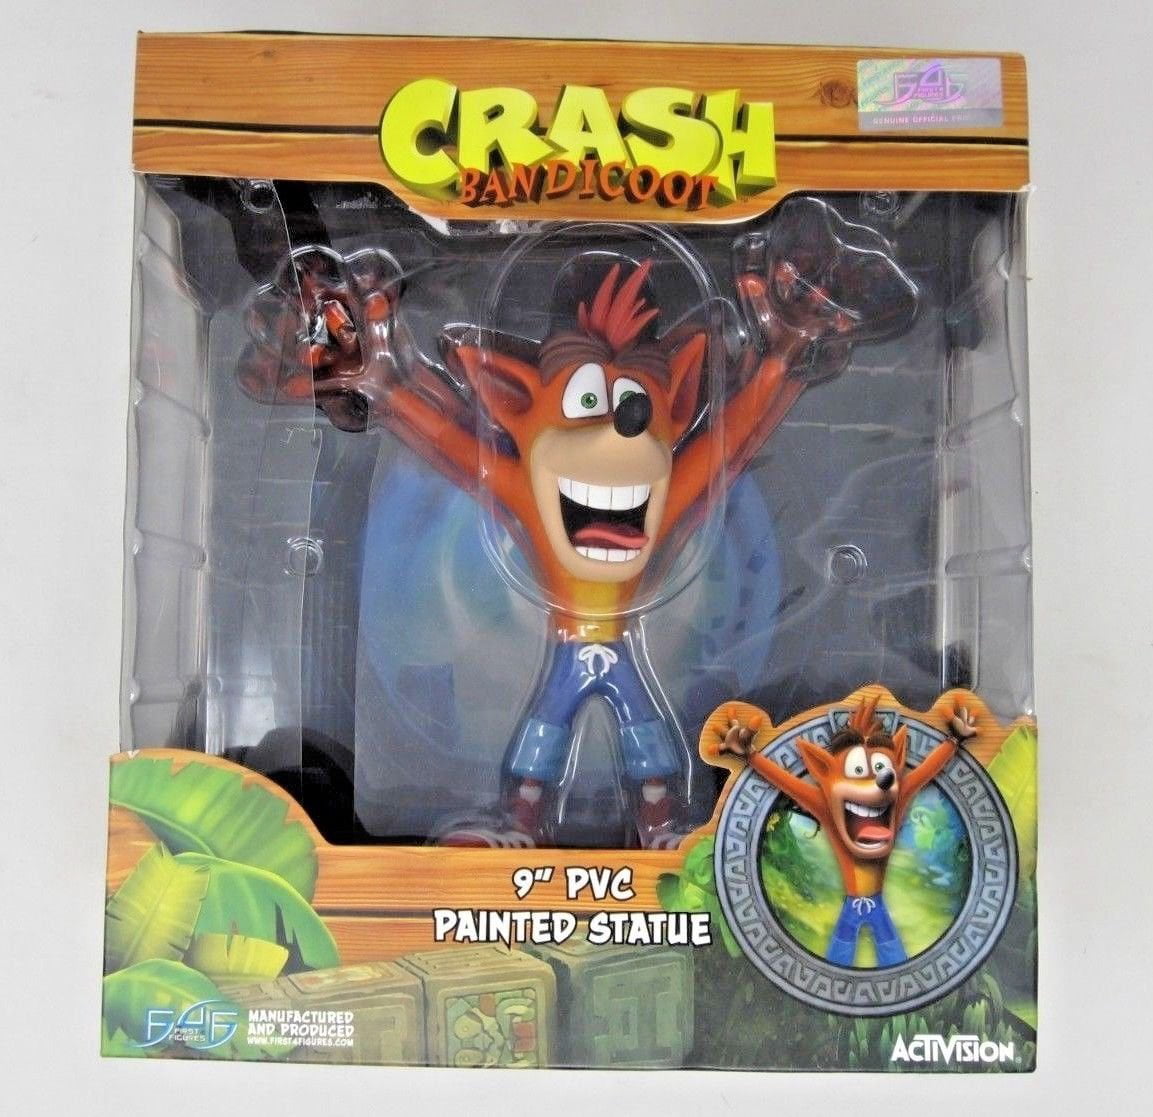 Crash Bandicoot PVC Painted Statue 9in First 4 Action Figure Toy Doll 